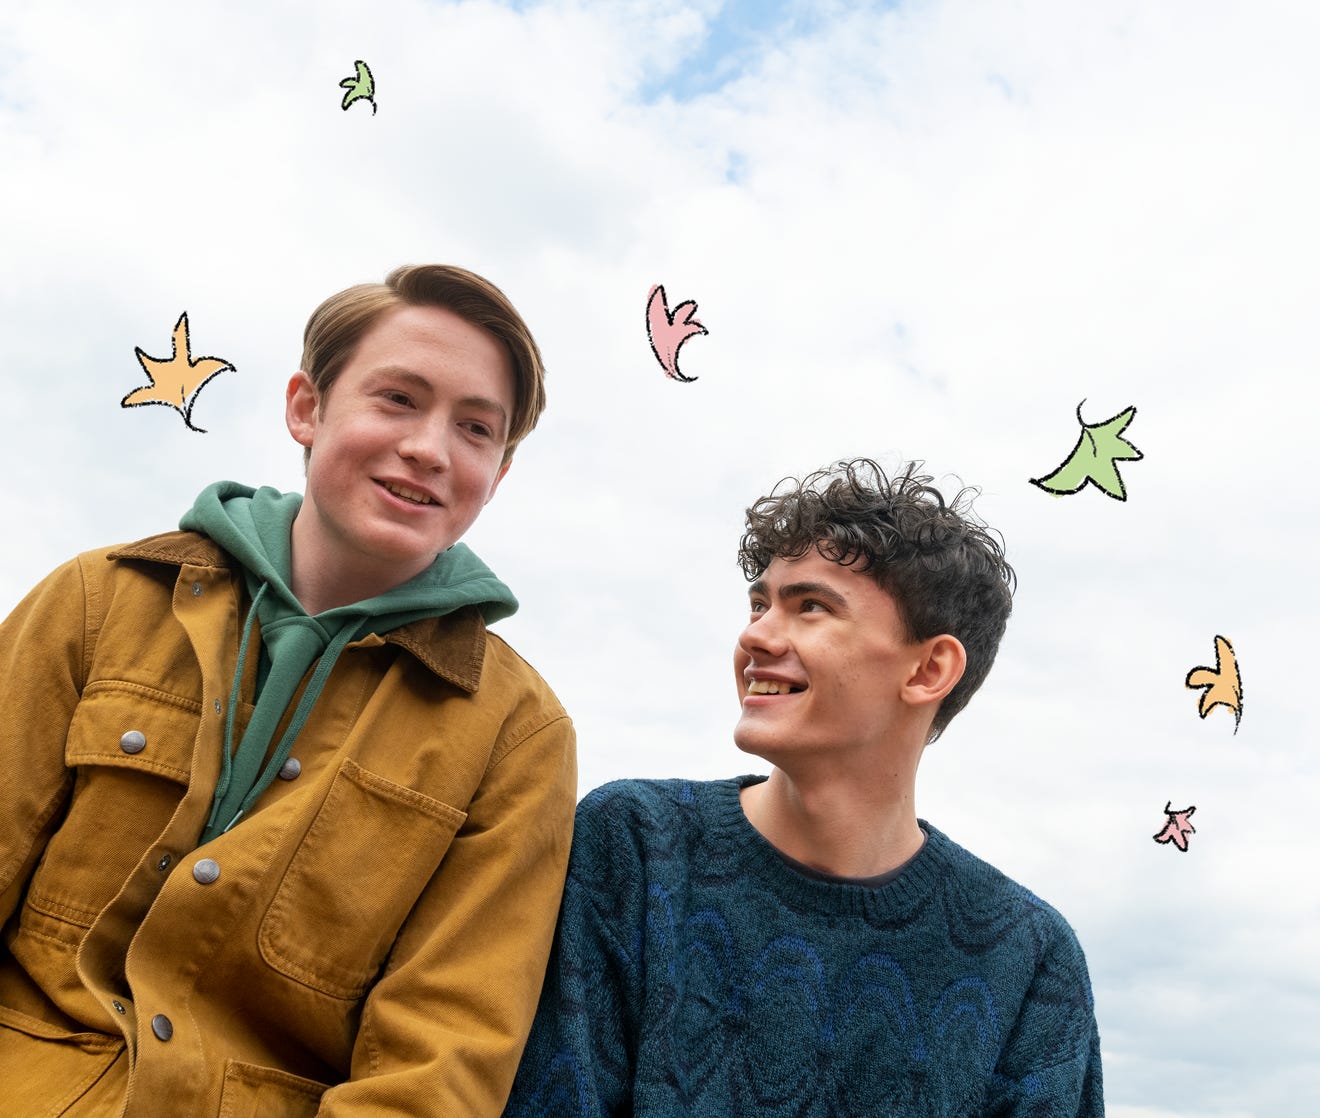 awwrated | 'Heartstopper': Why you should make time to watch Netflix's sweet, queer YA romance